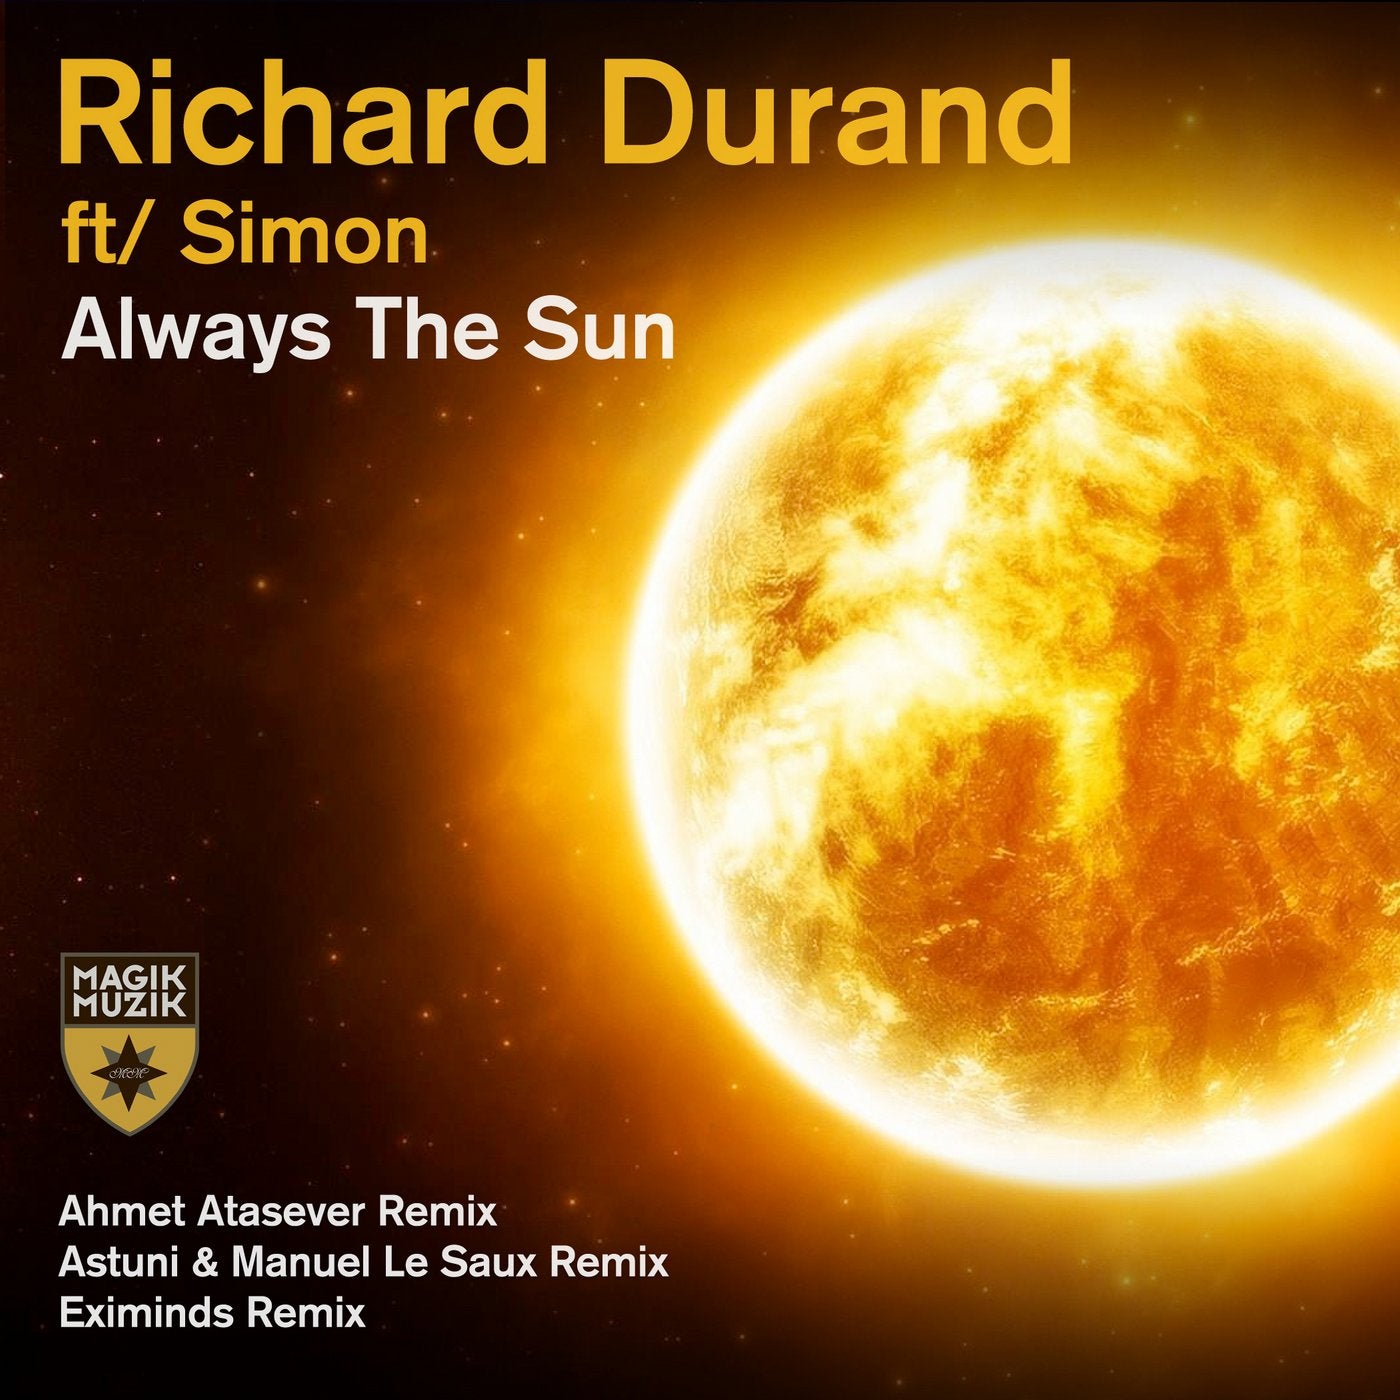 Солнце feat. Richard Durand always the Sun. Sun. Richard Durand always the Sun Eximinds Remix. Always the Sun (2022 Rework) Richard Durand.